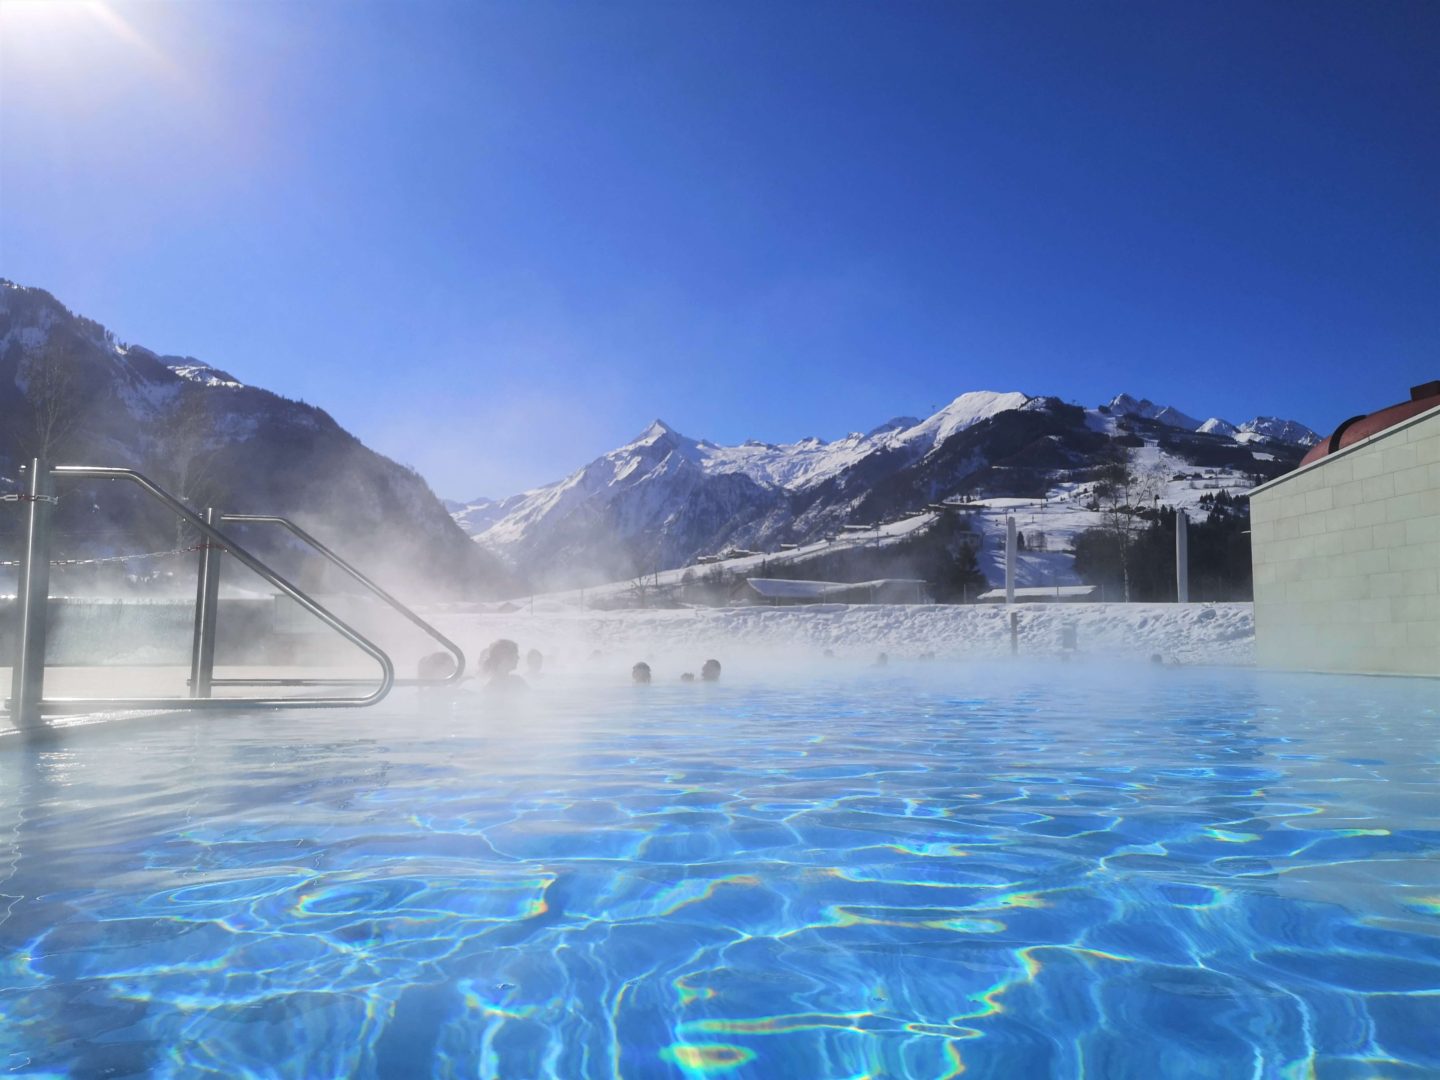 An outdoor pool, with steam rising. In the background are snowcapped mountains and a ski slope.